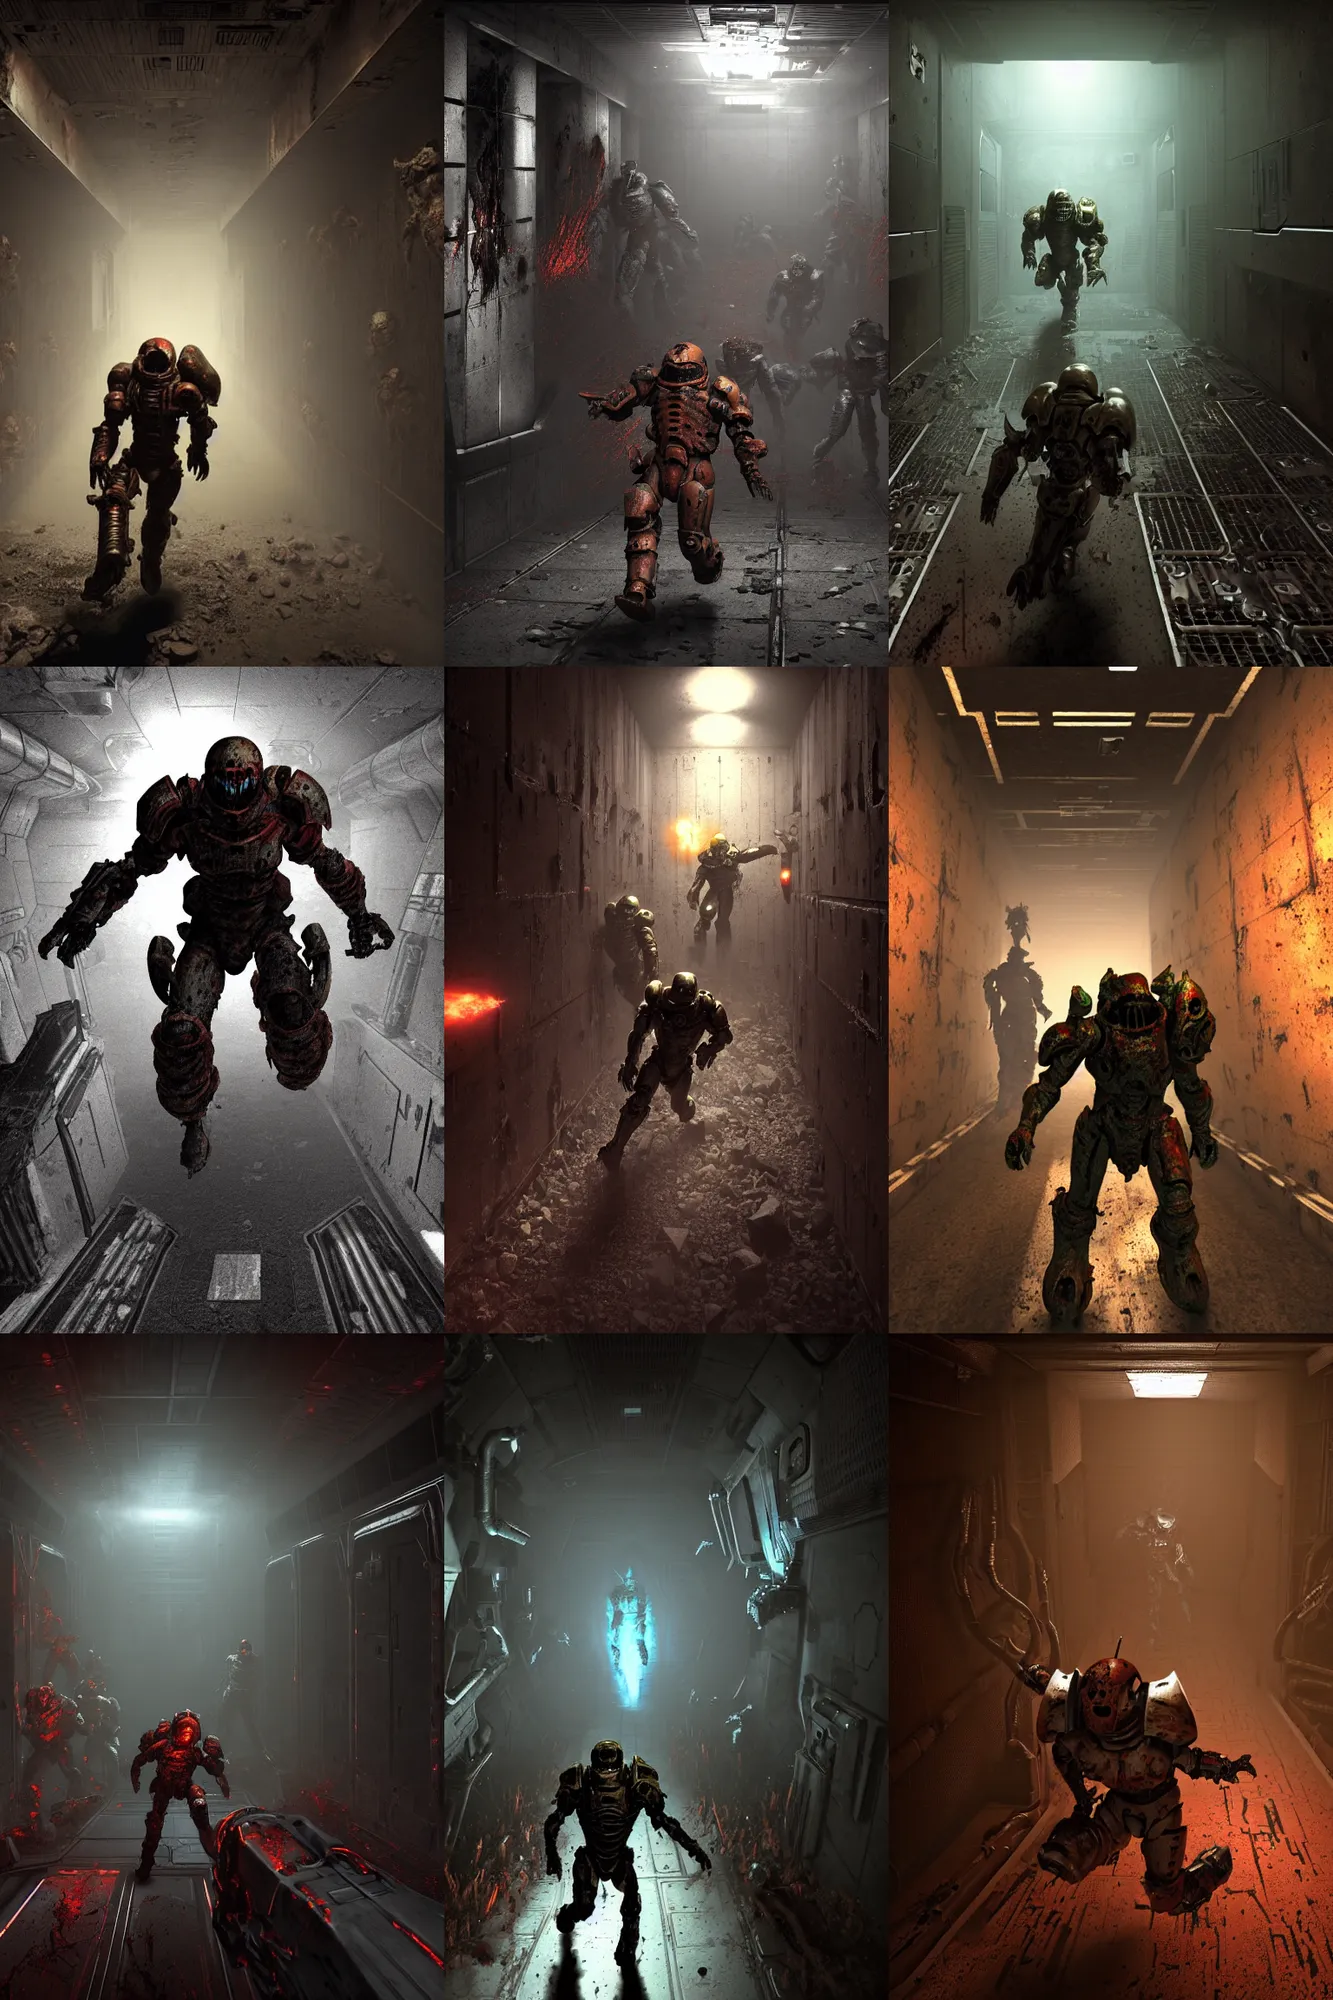 Prompt: horror movie scene of an individual in doomslayer armor being chased down a hallway, running through a desolate deep space mining station, rusty metal walls, broken pipes, dark colors, muted colors, tense atmosphere, mist floats in the air, amazing value control, dead space, moody colors, dramatic lighting, ussg ishimura, frank frazetta